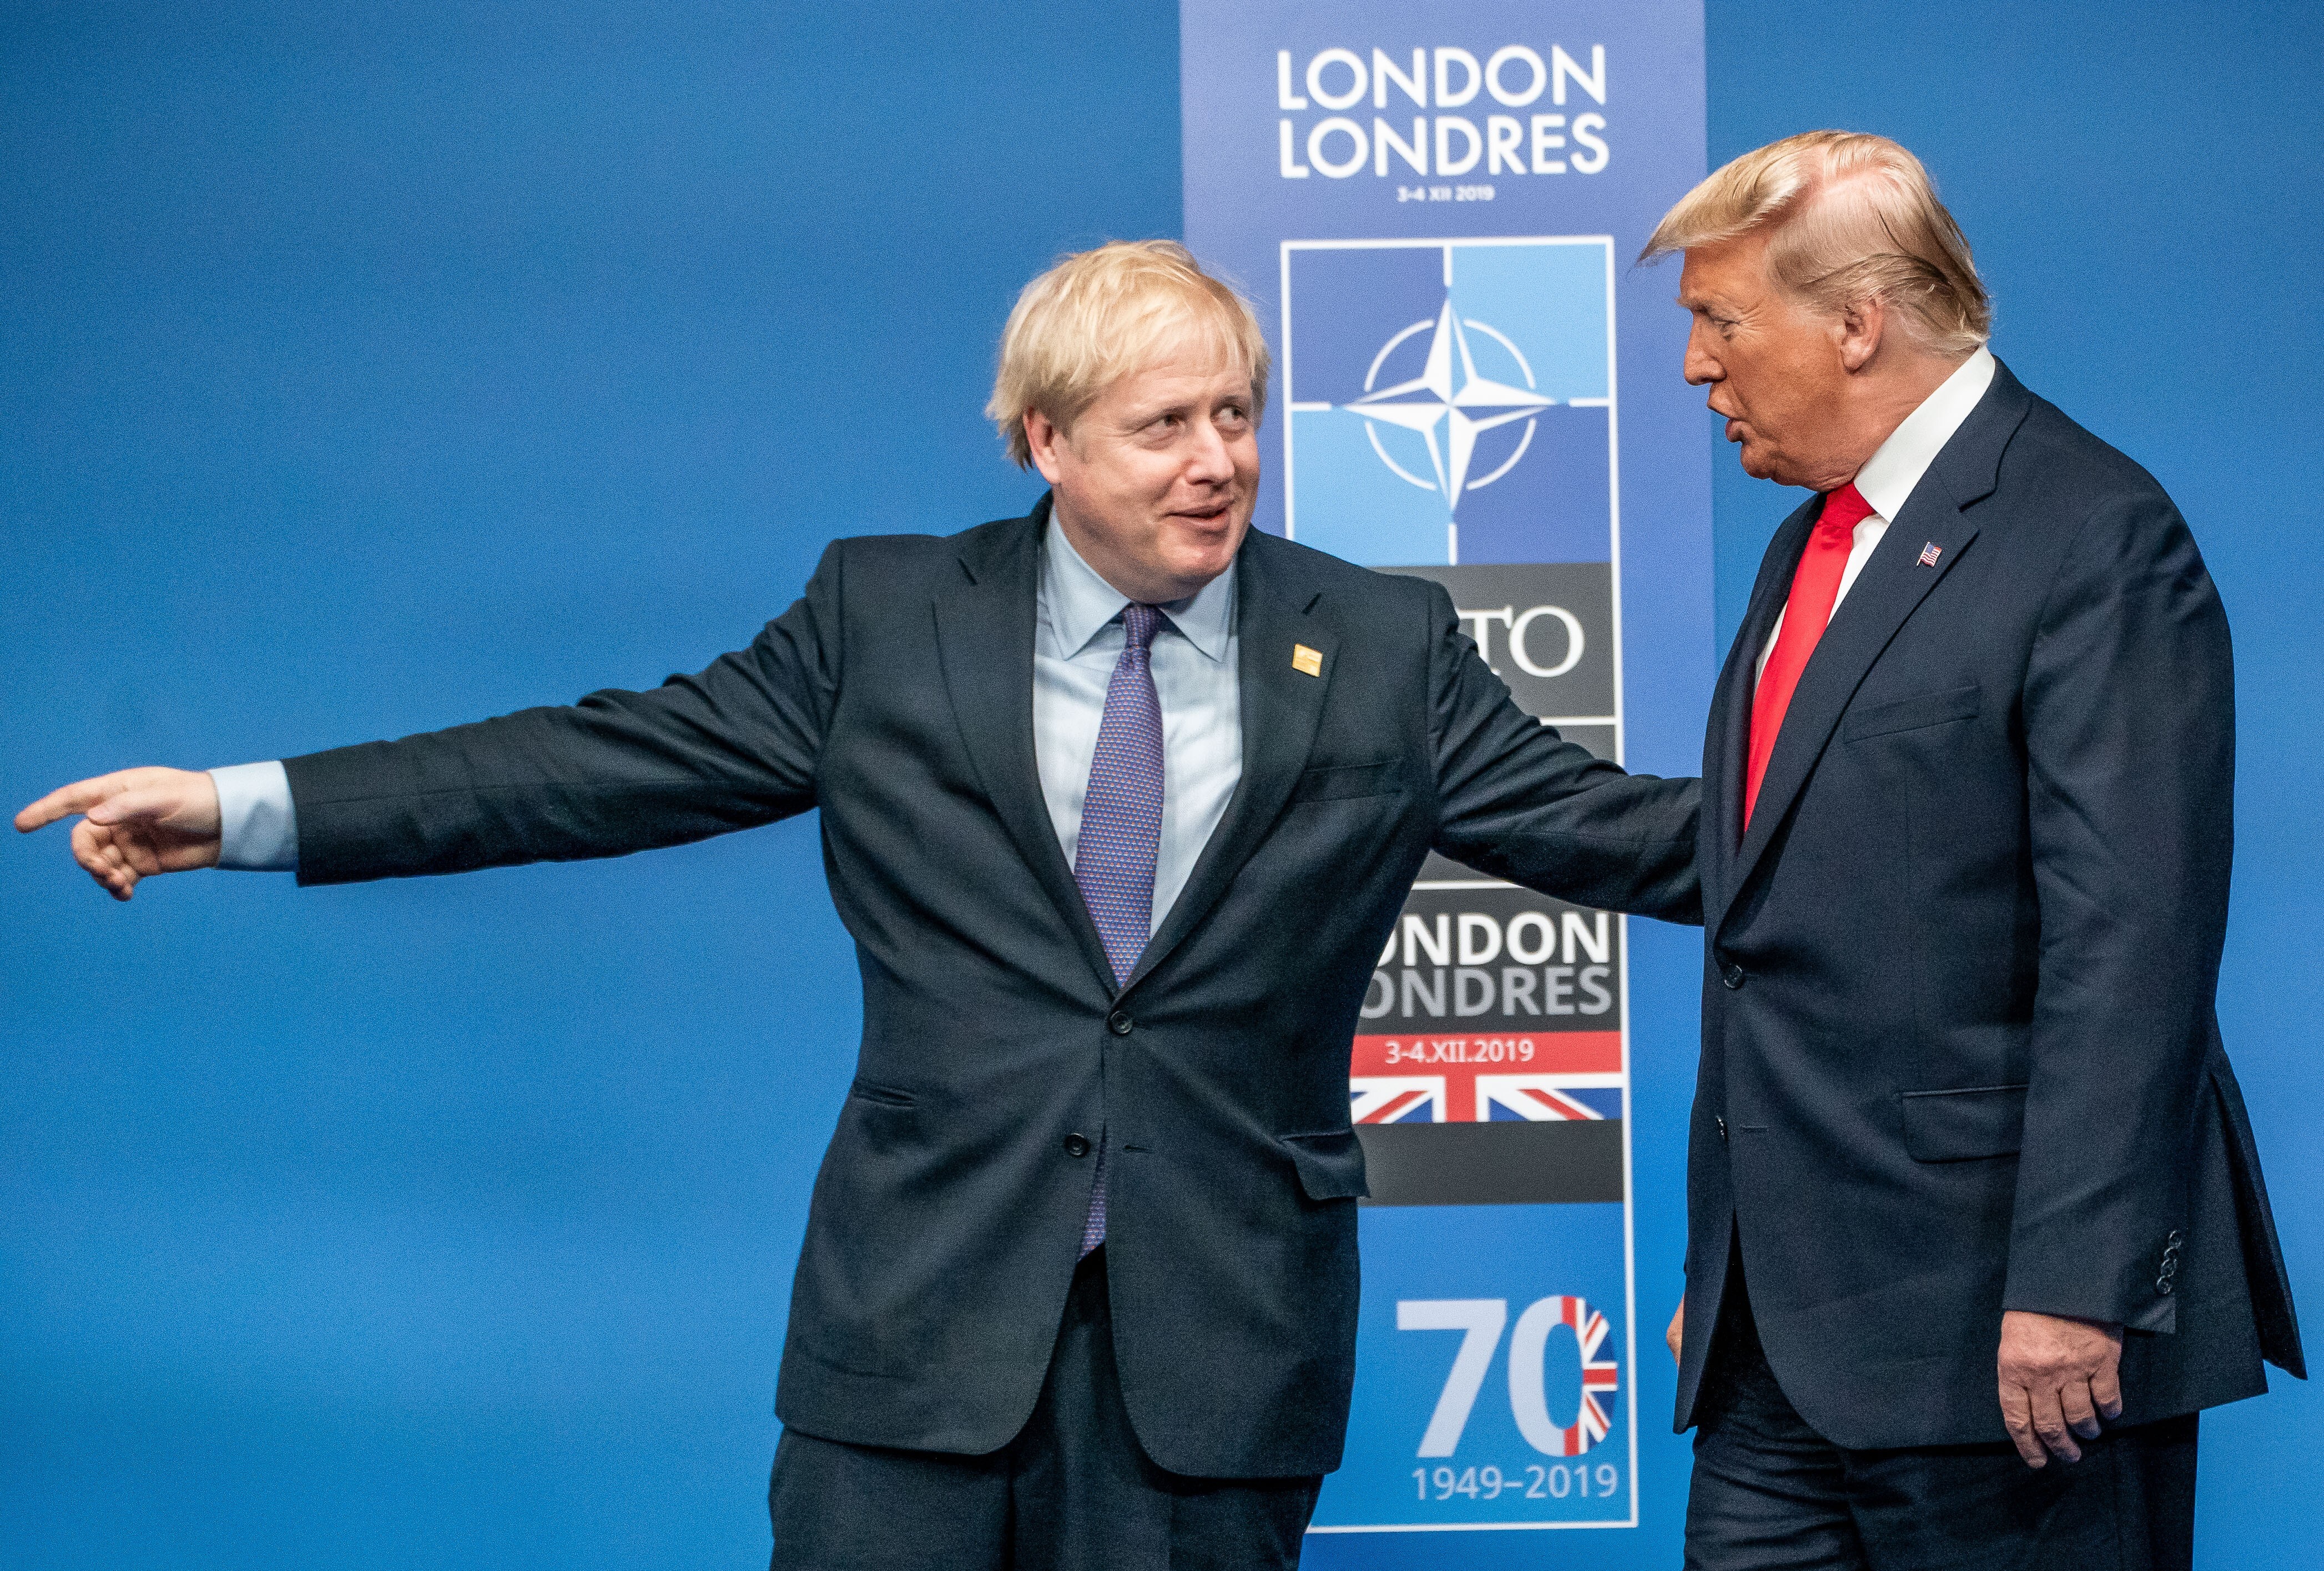 British Prime Minister Boris Johnson (left) welcomes US President Donald Trump before the start of a round table meeting during the annual Nato Leaders Summit in Watford, England, on December 4, 2019. Photo: dpa